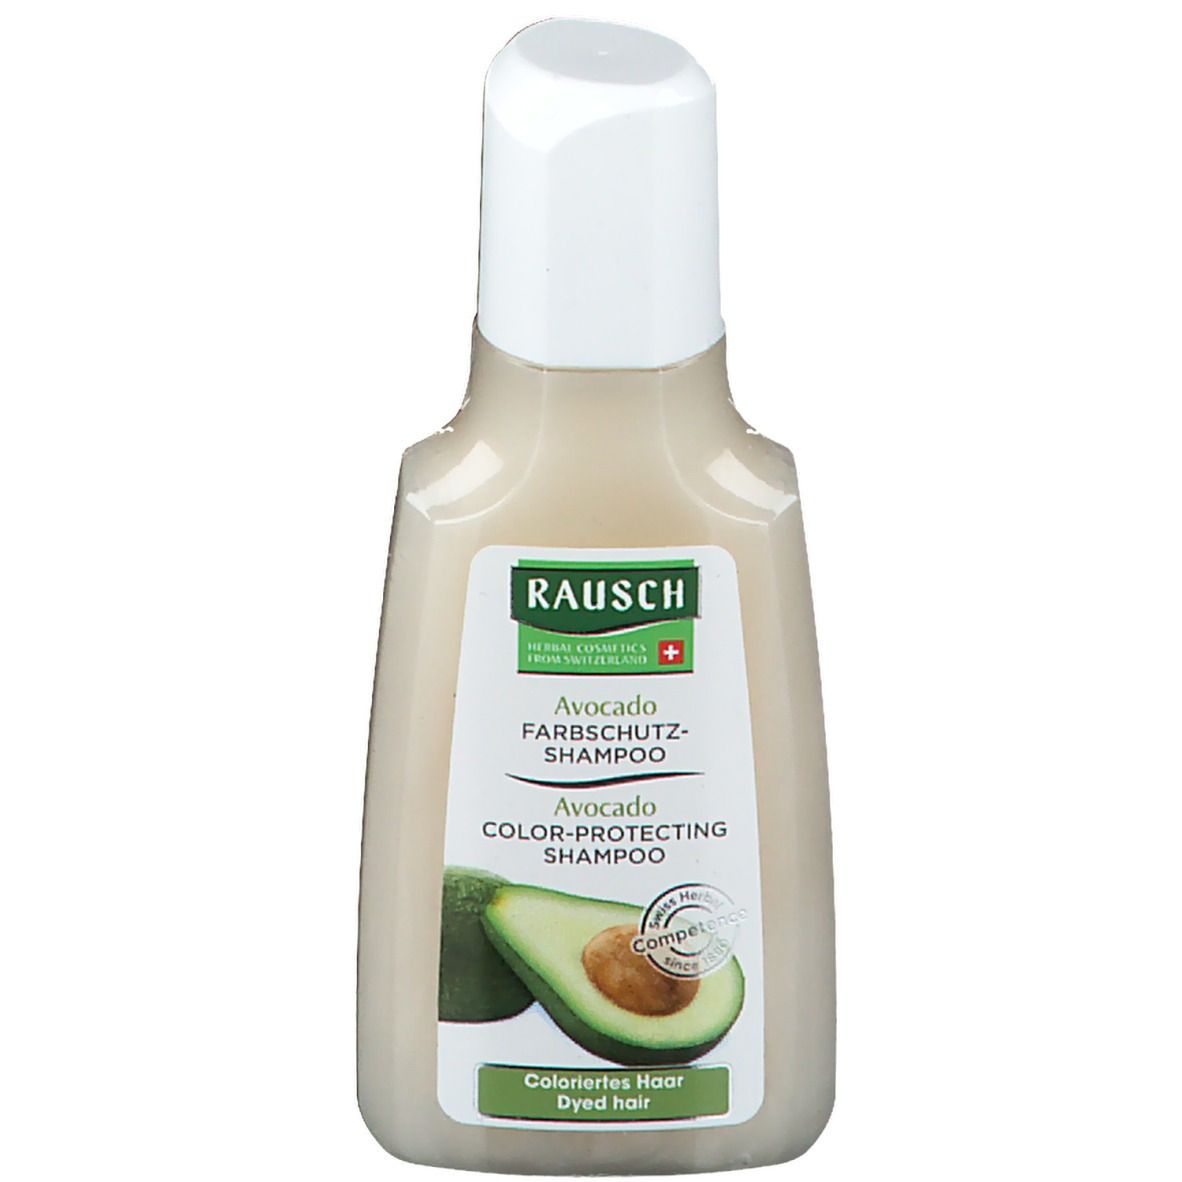 RAUSCH Avocat Shampooing Protection de coloration